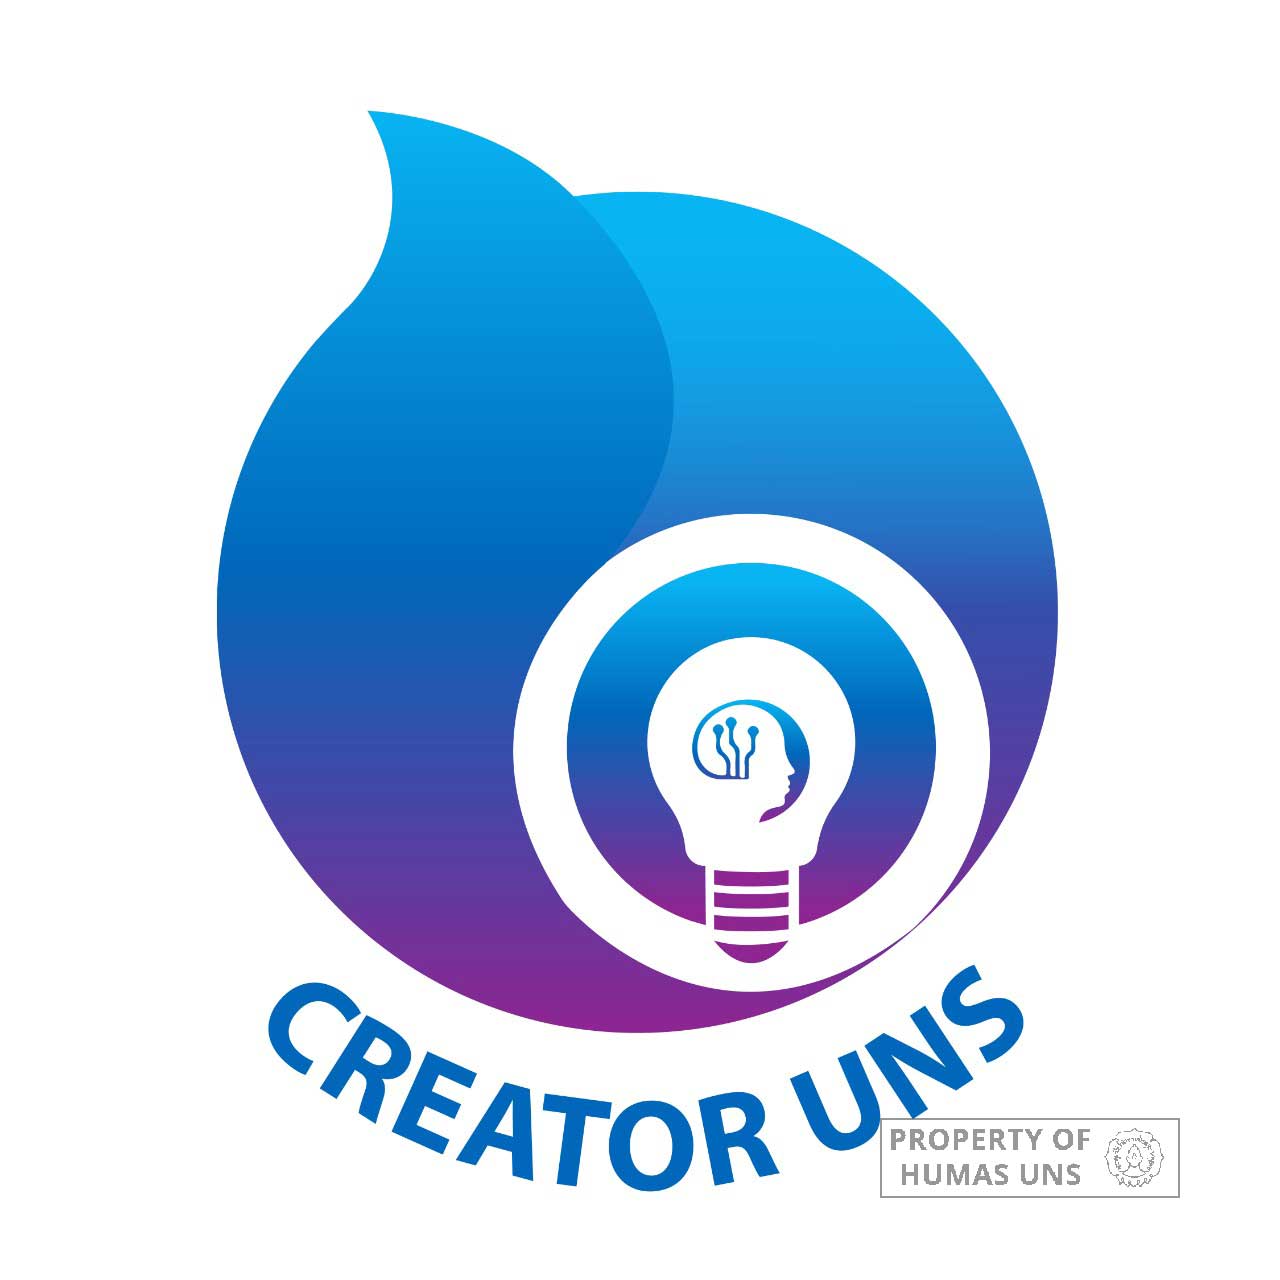 Creator UNS: Facility for Students to Innovate in Digital Era